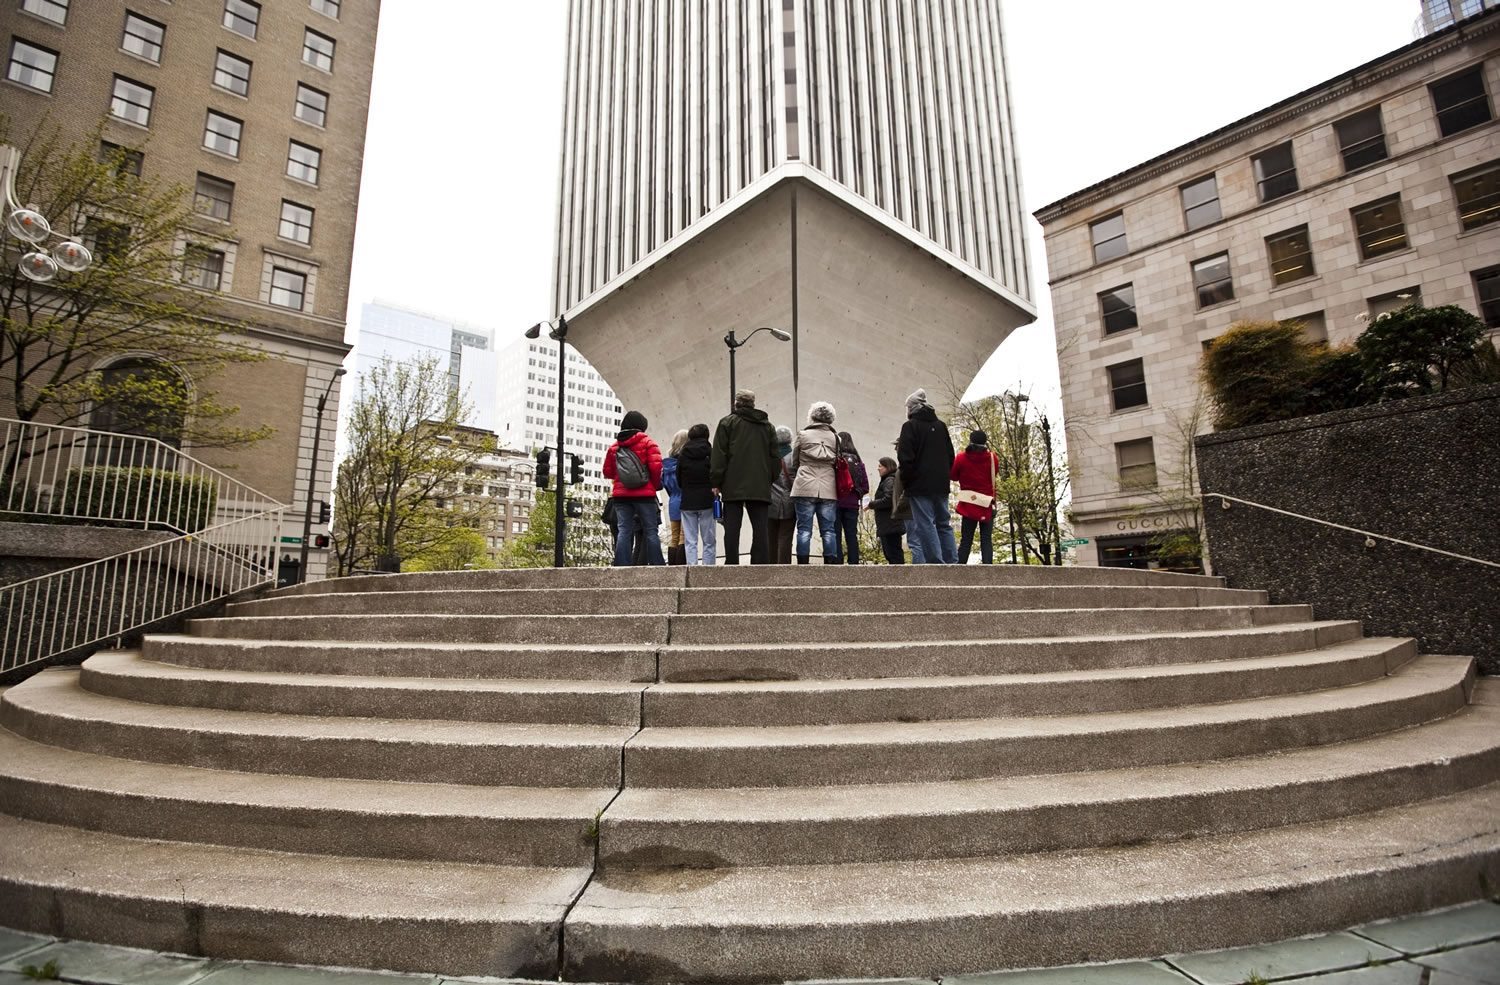 A recent tour given by the Seattle Architecture Foundation pauses at the foot of the Rainier Tower, designed by Minoru Yamasaki, the Seattle-born architect best known for designing the twin towers of the World Trade Center in New York City.